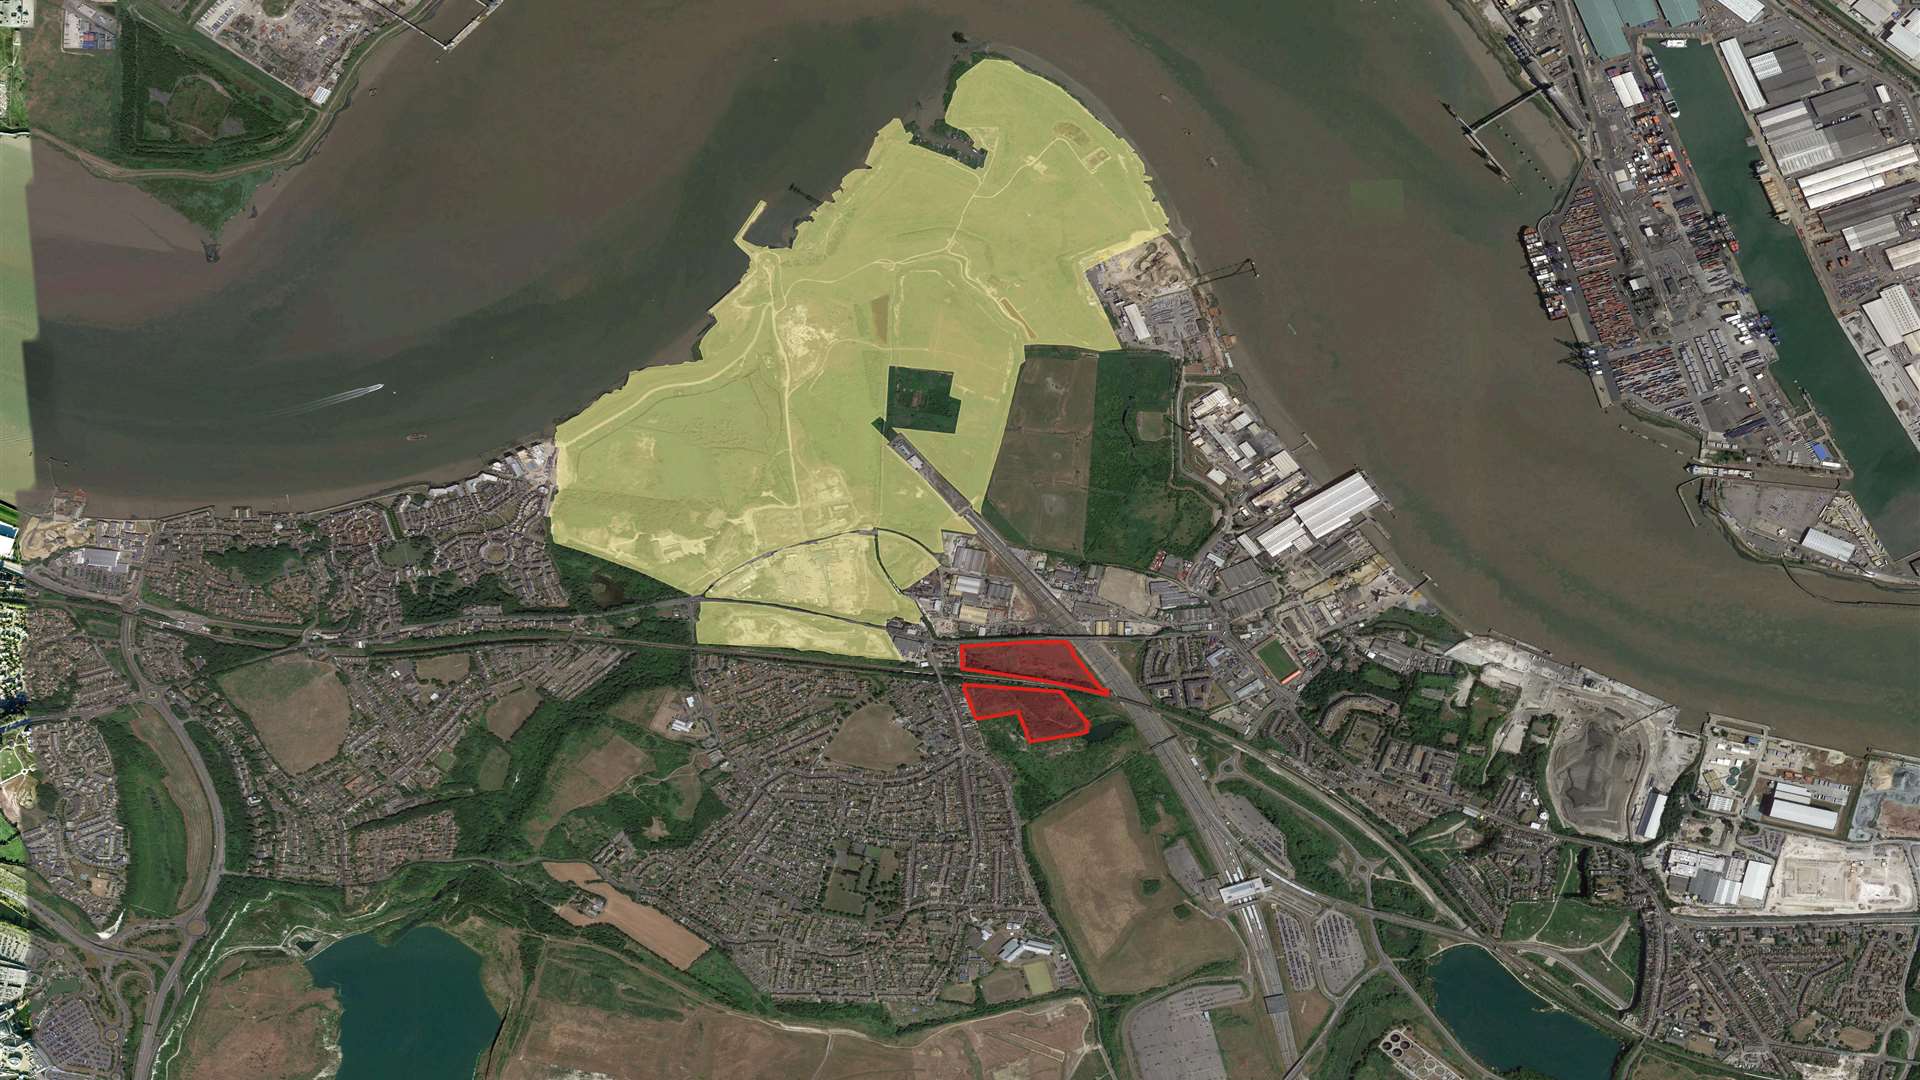 The Bamber Pit and Sports Ground land bought by London Paramount is shown in red alongside the land it has an agreement to purchase from Lafarge Tarmac, highlighted in green